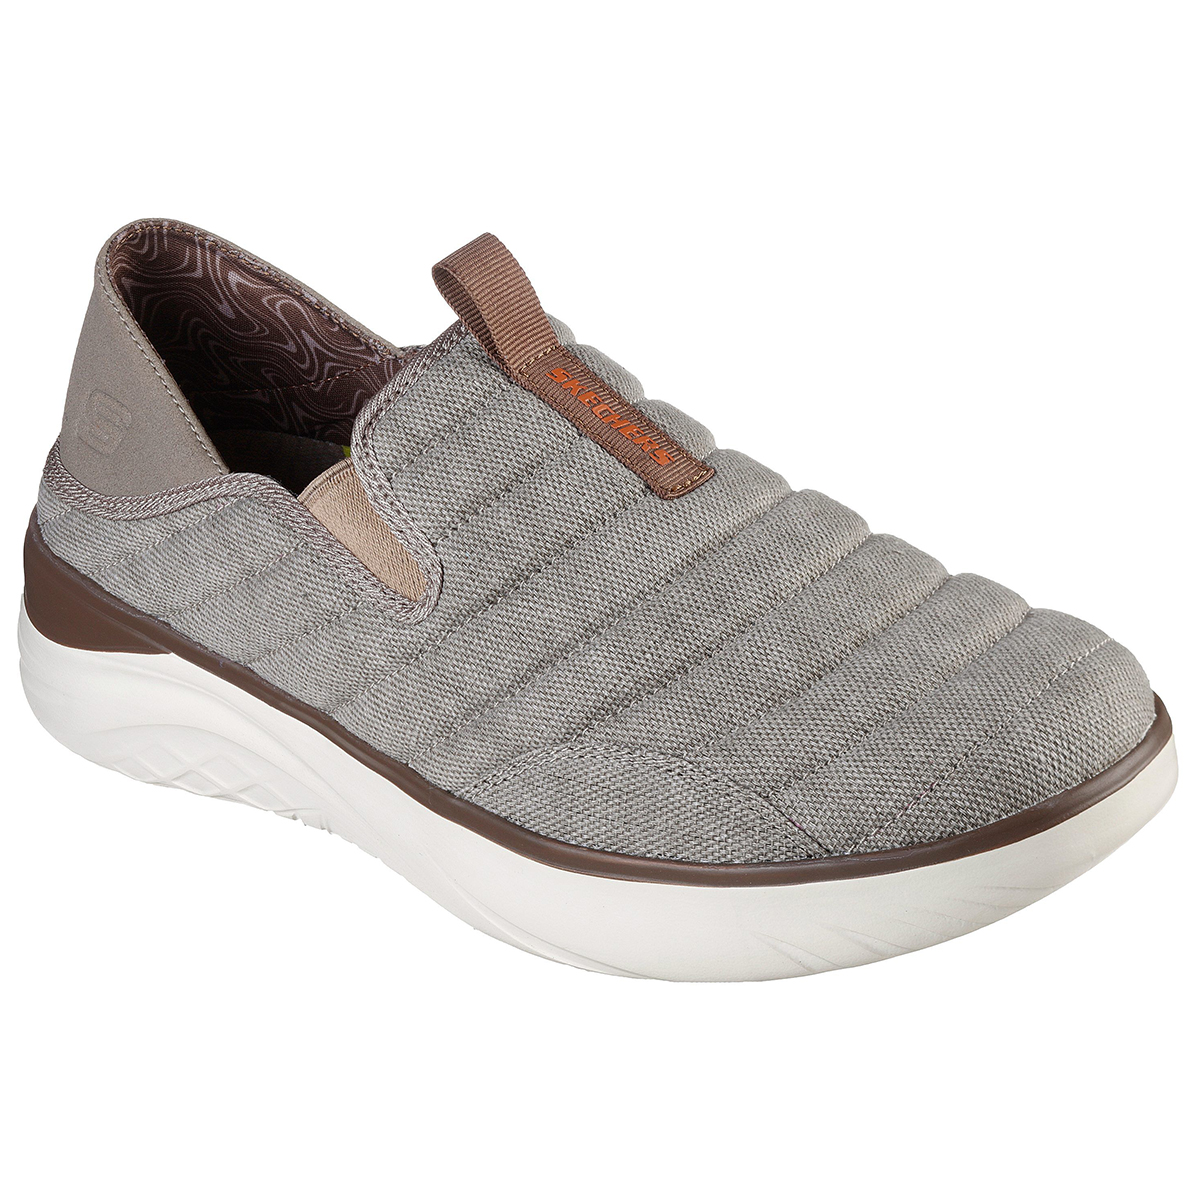 Skechers Men's Relaxed Fit: Glassell - Milroy Shoes